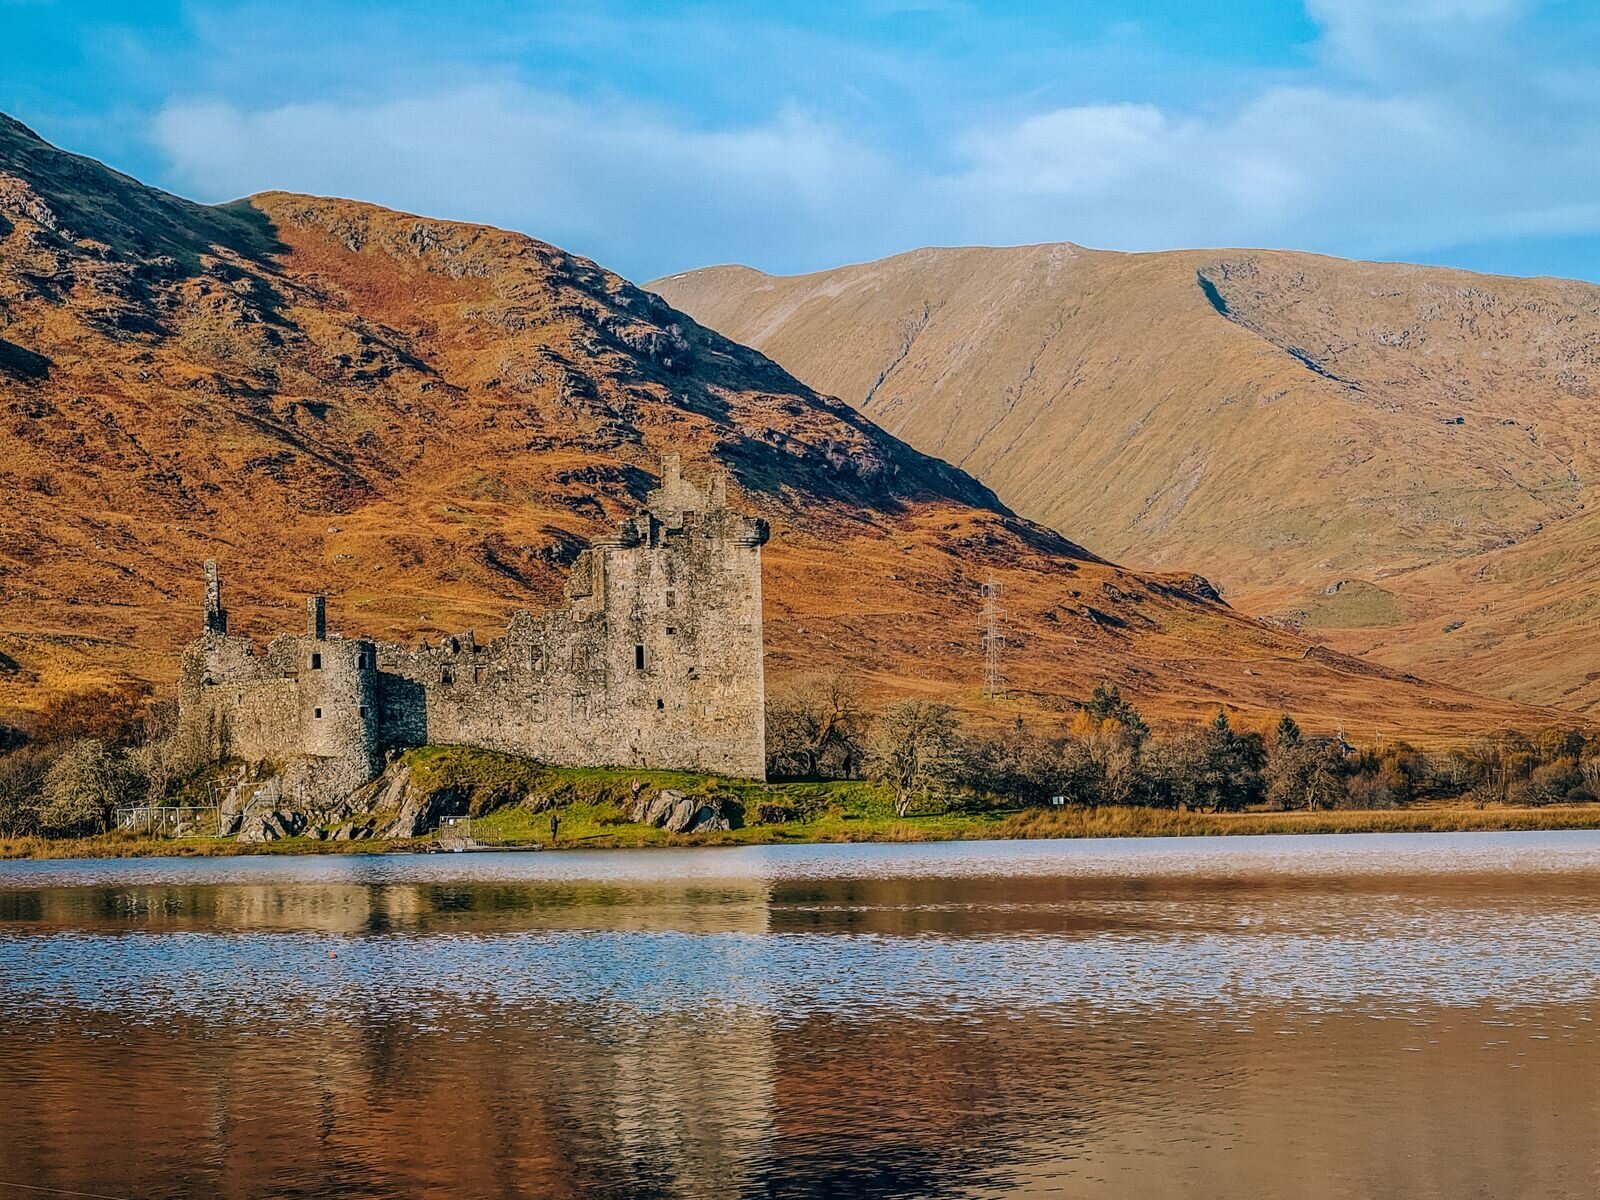 Looking across a lake with castle ruins on the far shore and mountains behind, covered in orange heather. Kilchurn Castle in Scotland